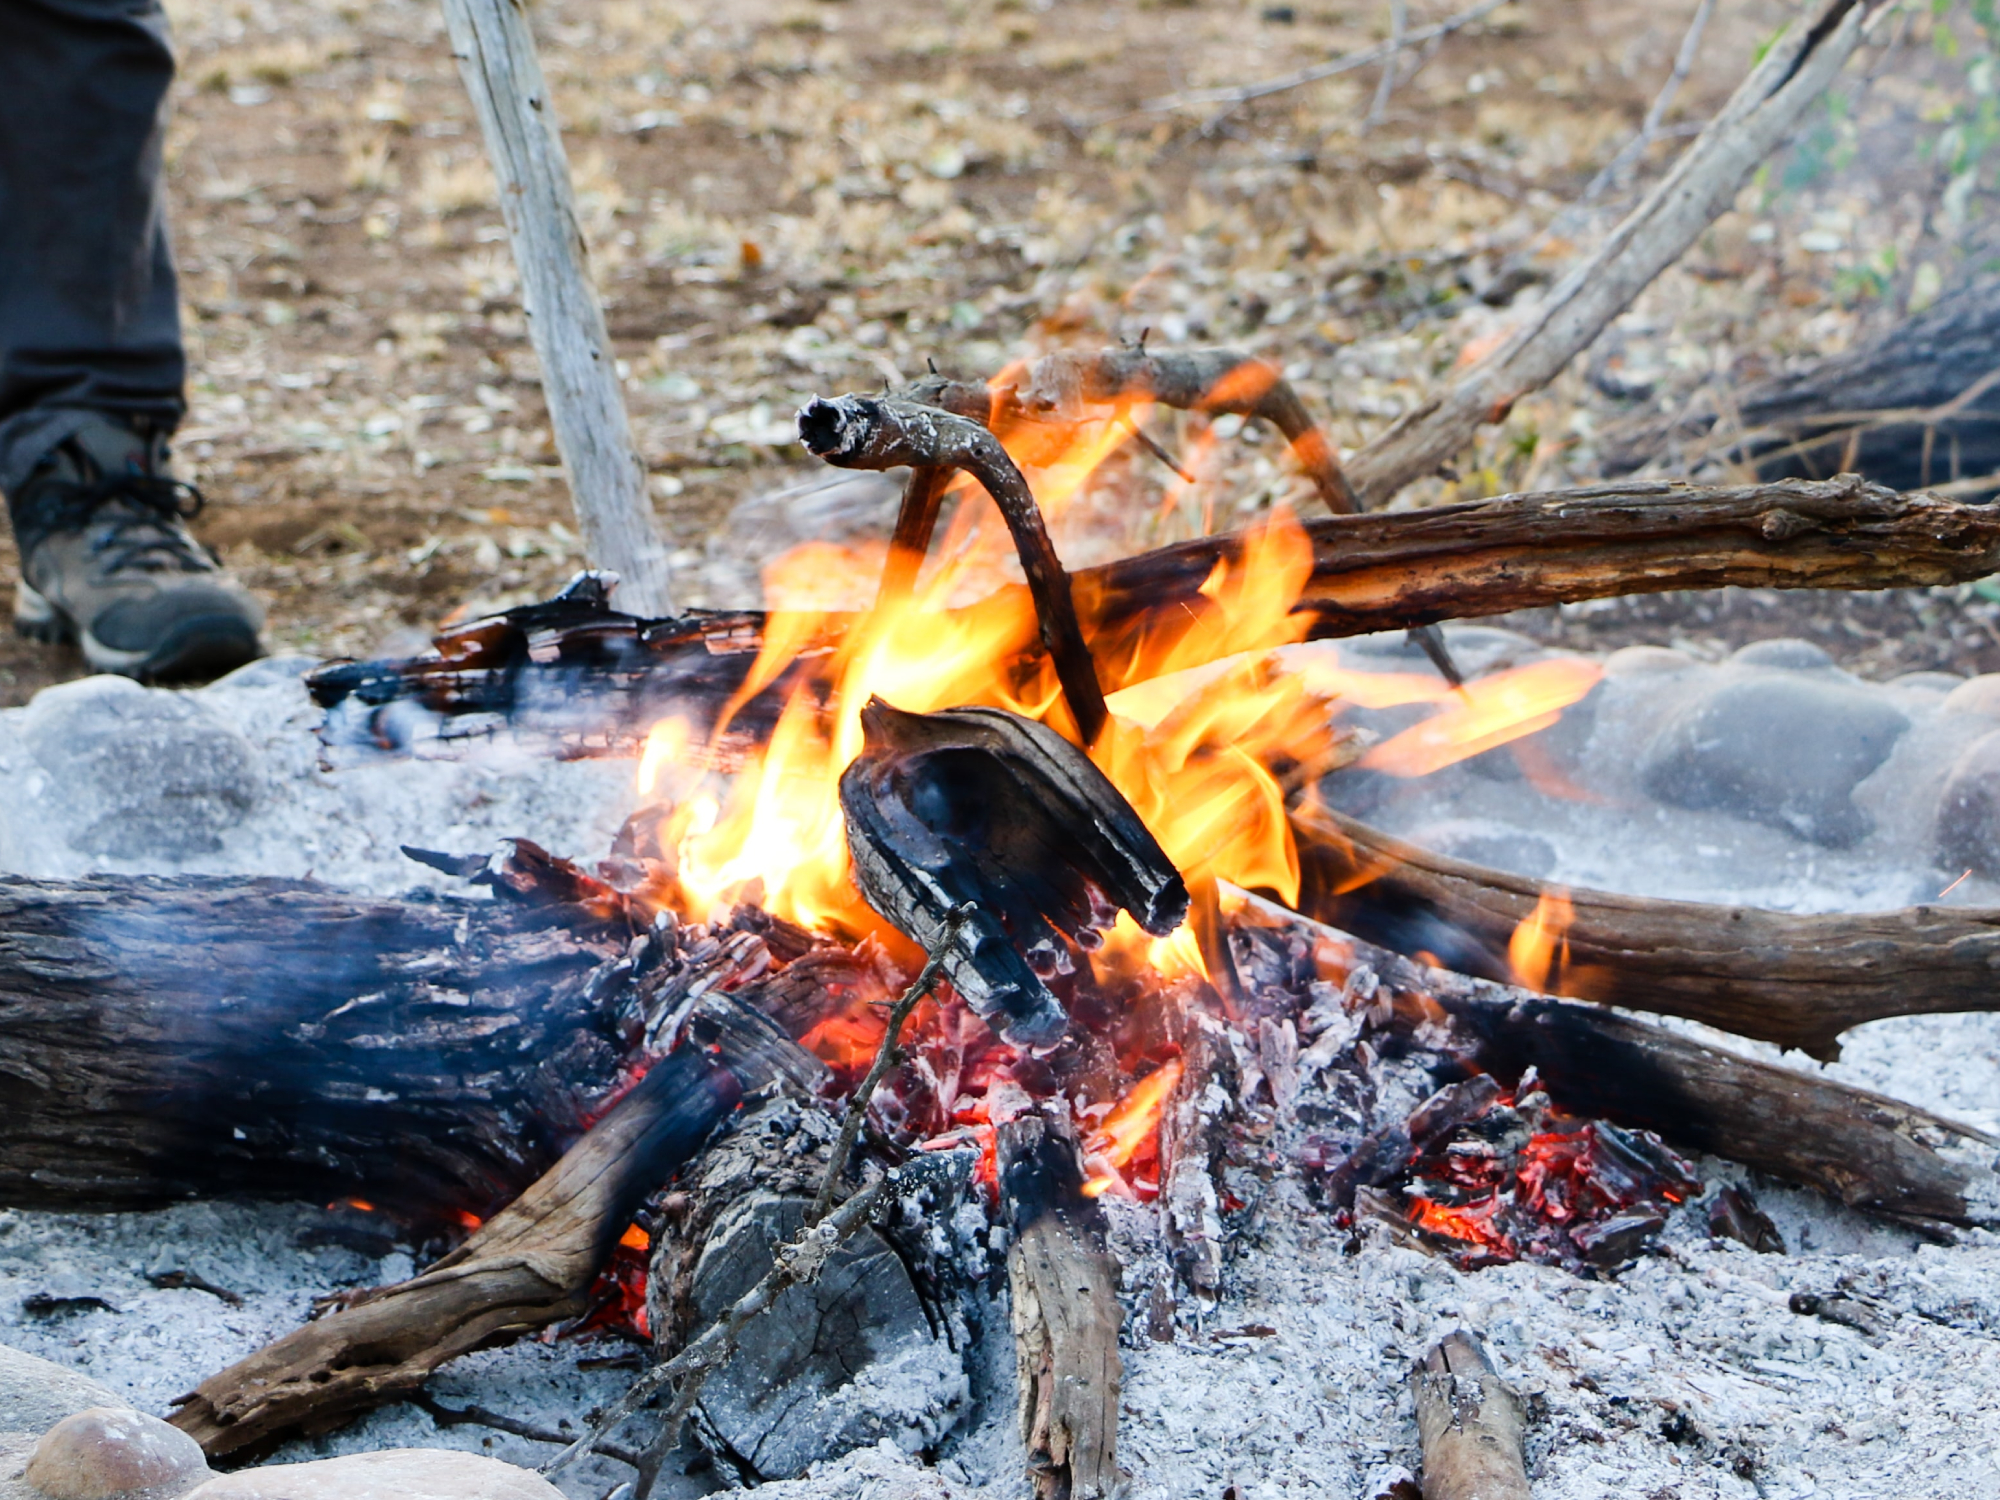 How to build and extinguish a campfire without sparking a catastrophe